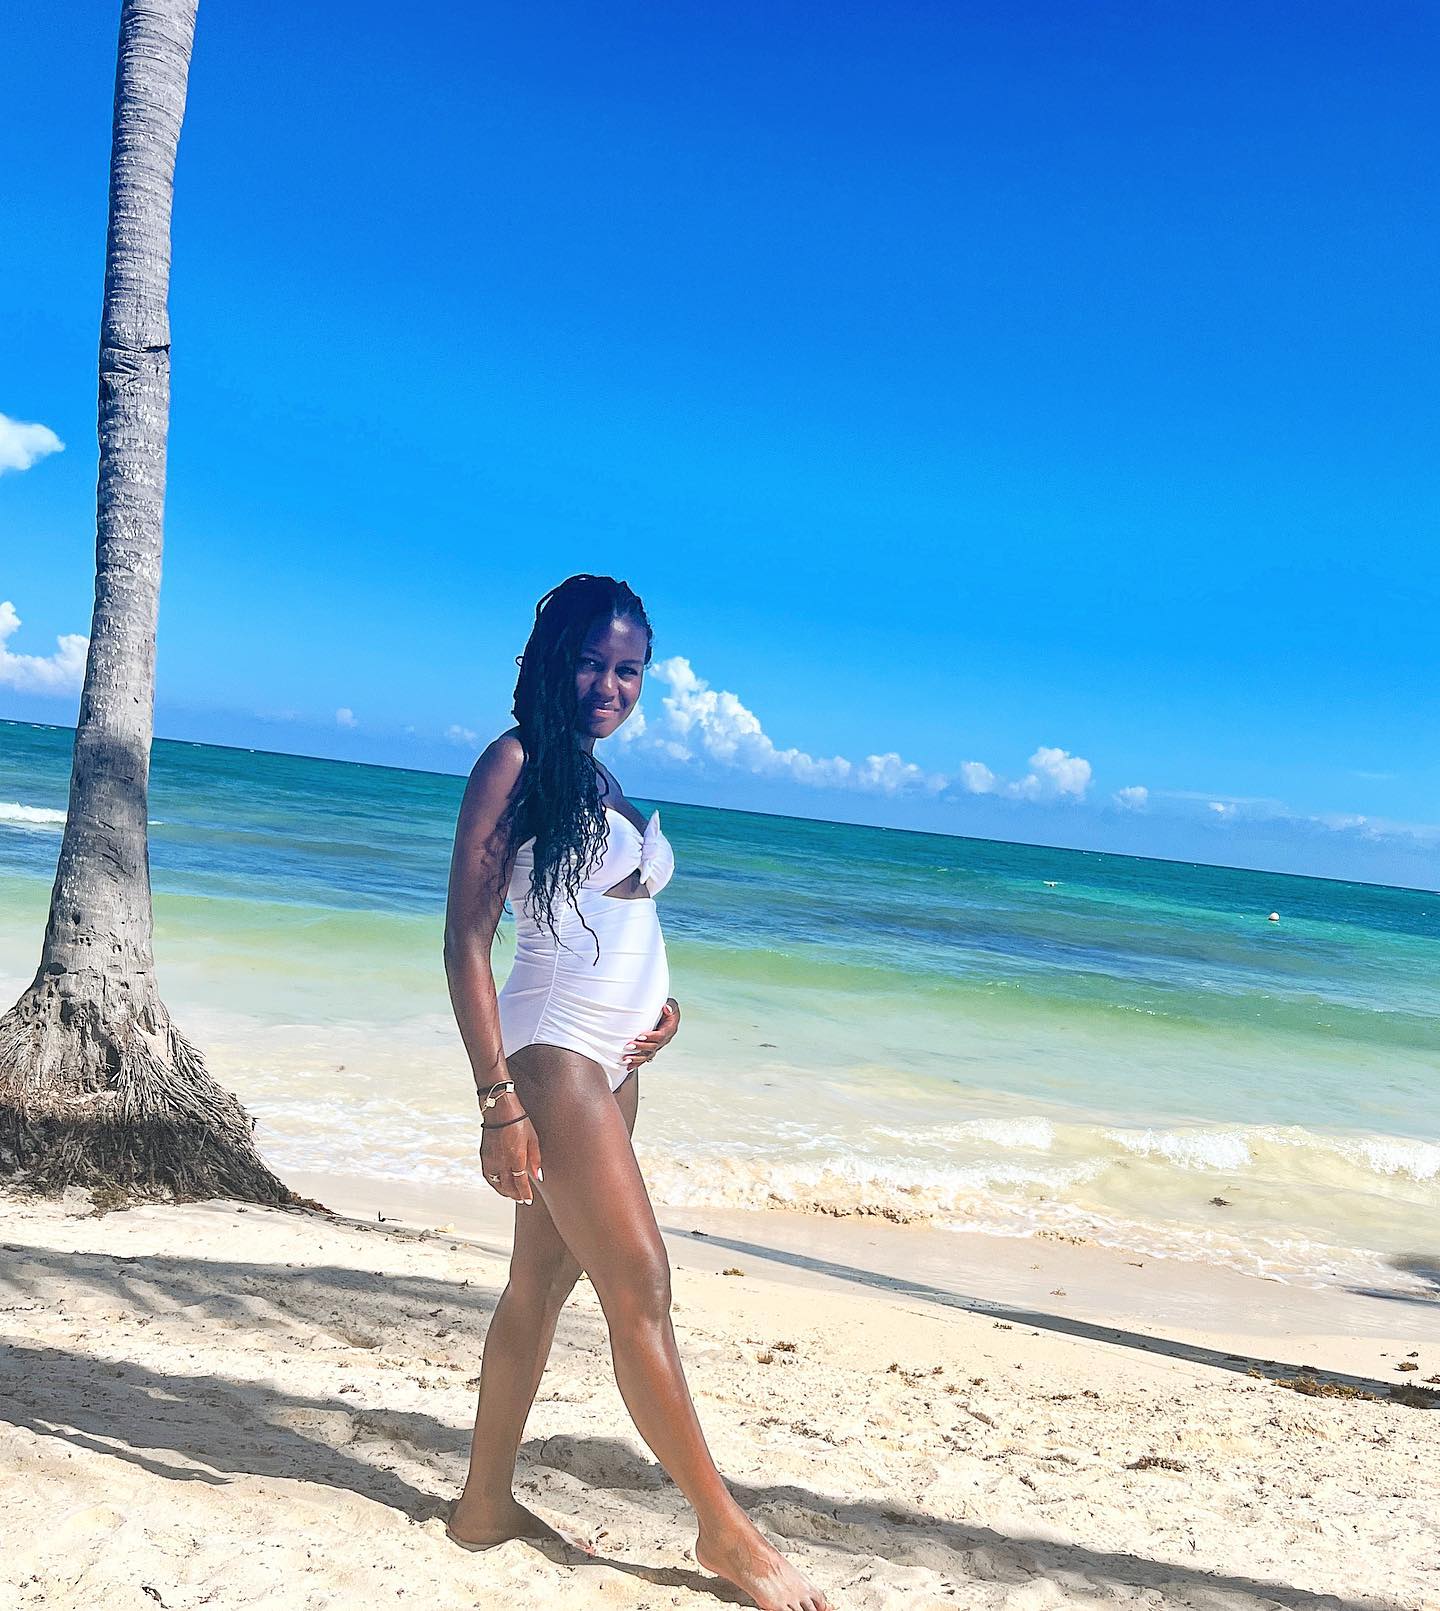 She showed off her developing baby bump while on vacation over the summer